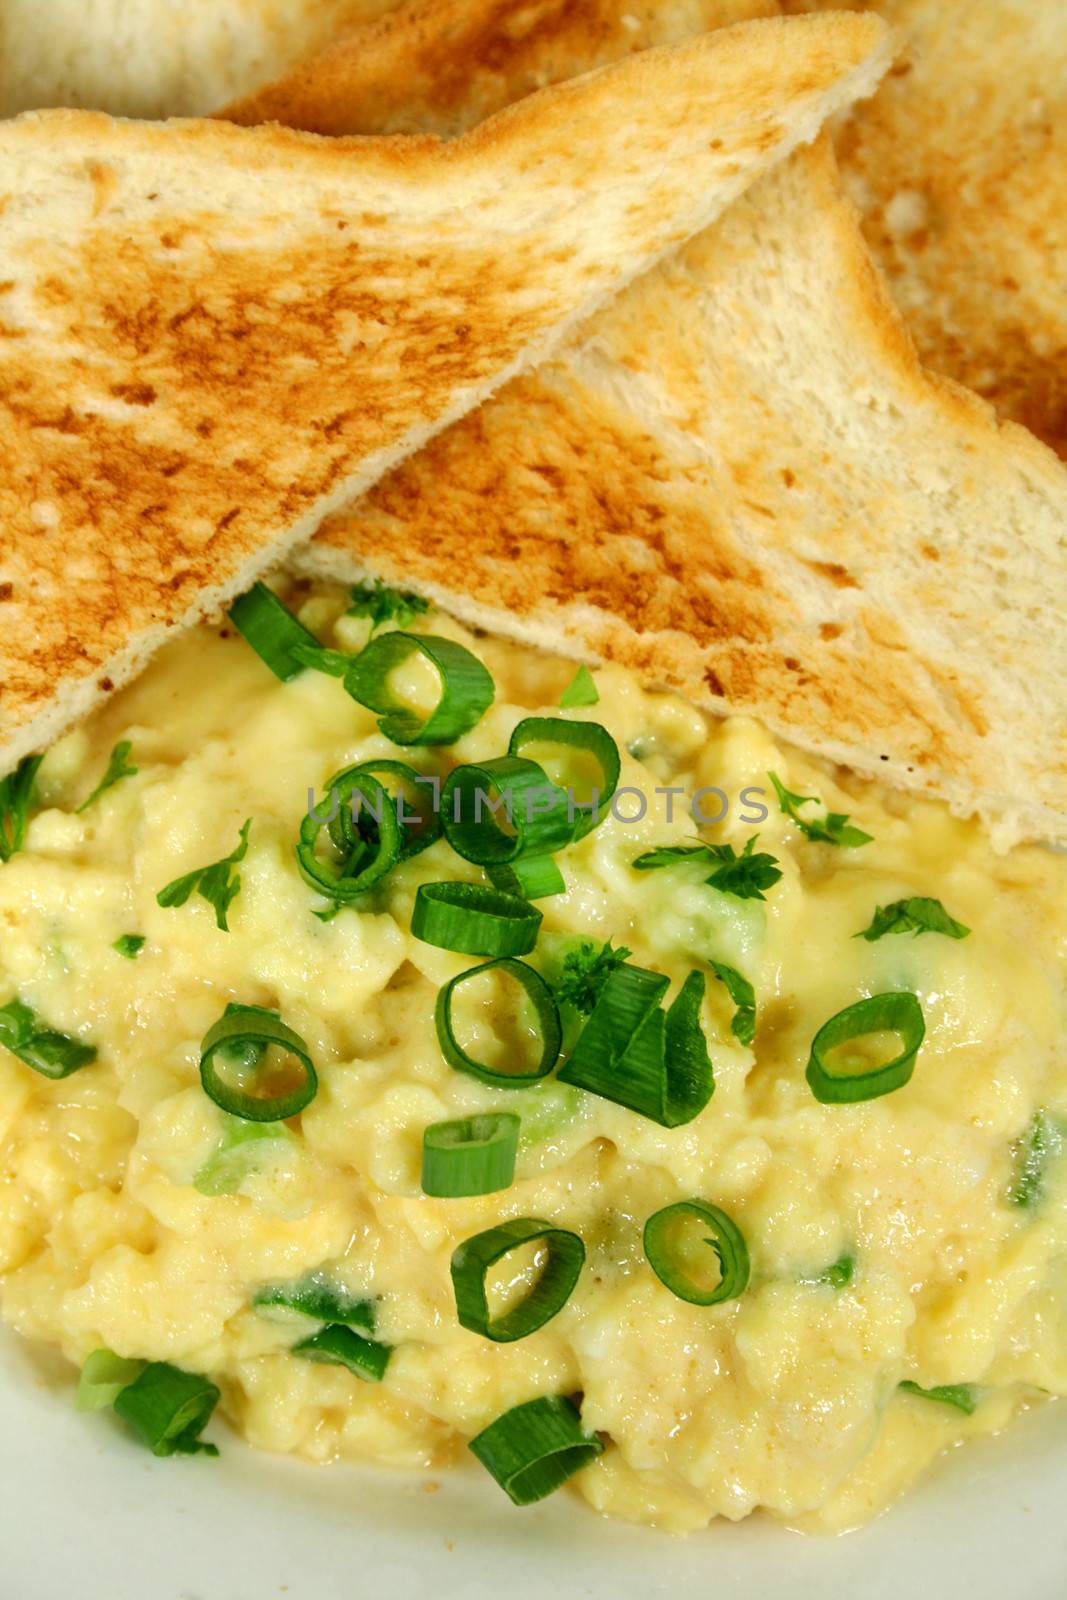 Great breakfast of creamy scrambled eggs with toast and diced shallots.